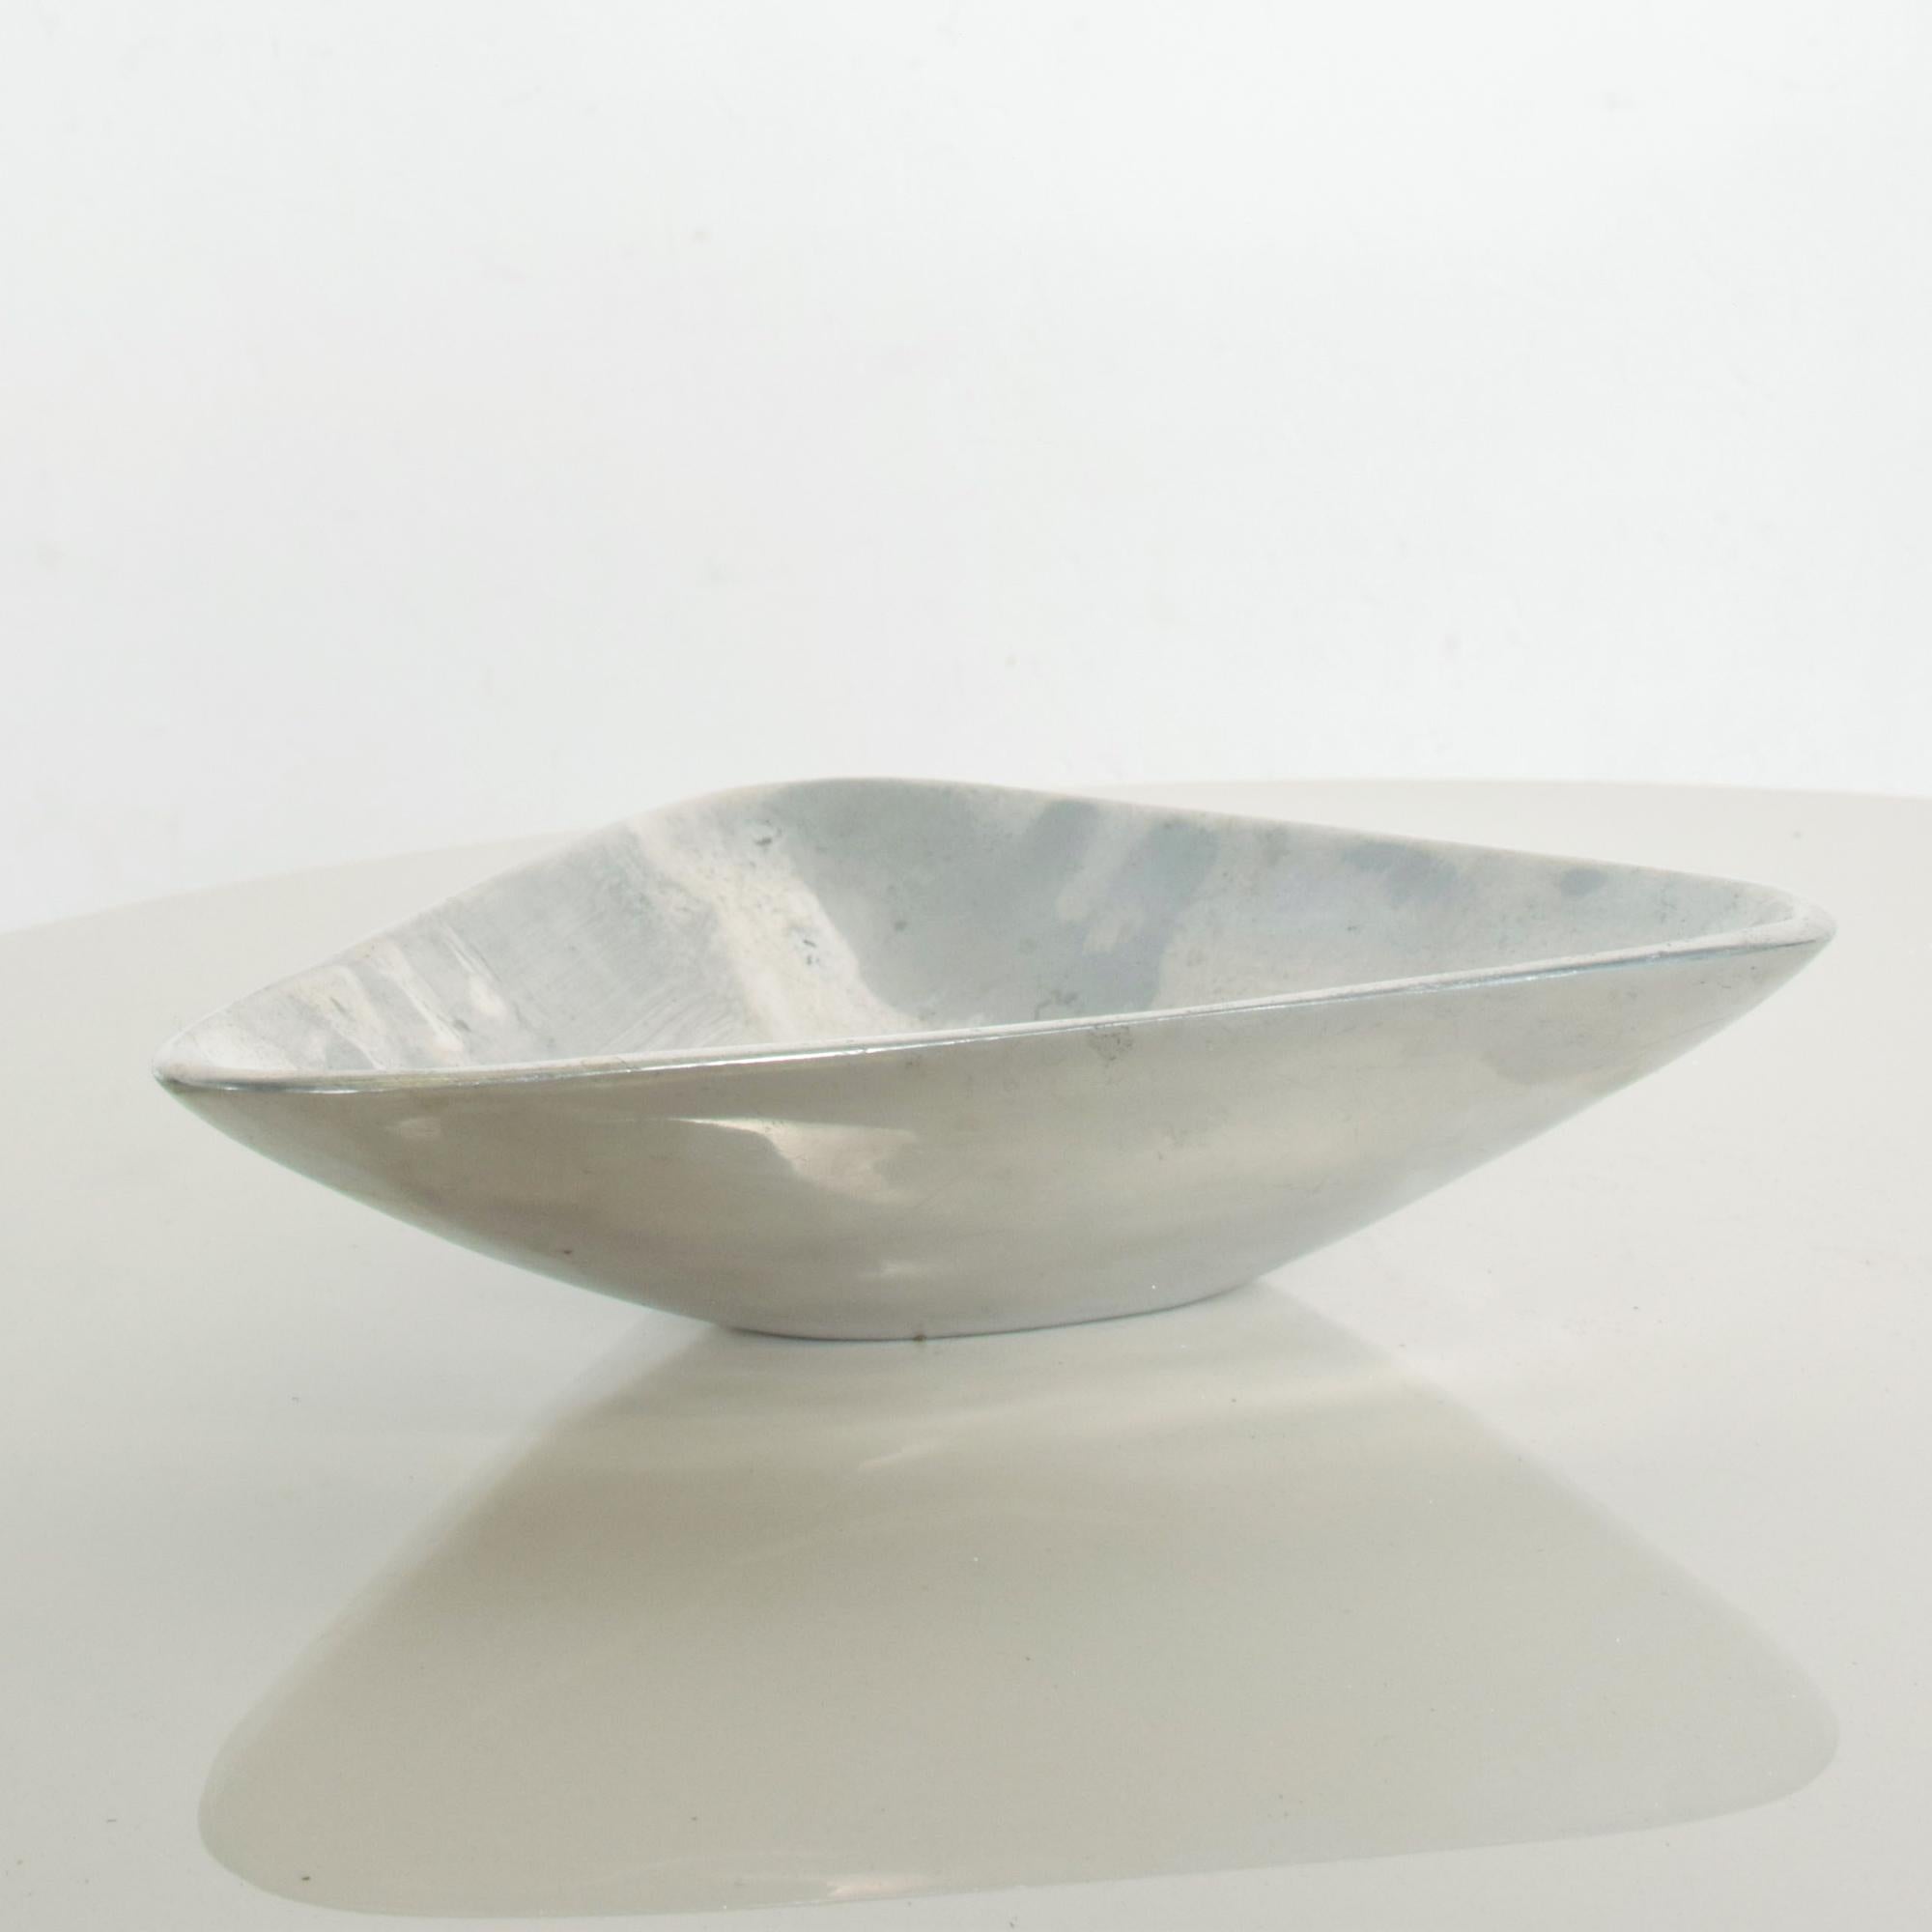 Graceful Midcentury Modern Vintage  Silver Triangular Bowl Decorative Candy Dish Serving Piece Catch-All. circa the 1960s
After Designer for Nambe Richard K. Thomas sculptor. No stamp or label present. 
Measures: 8